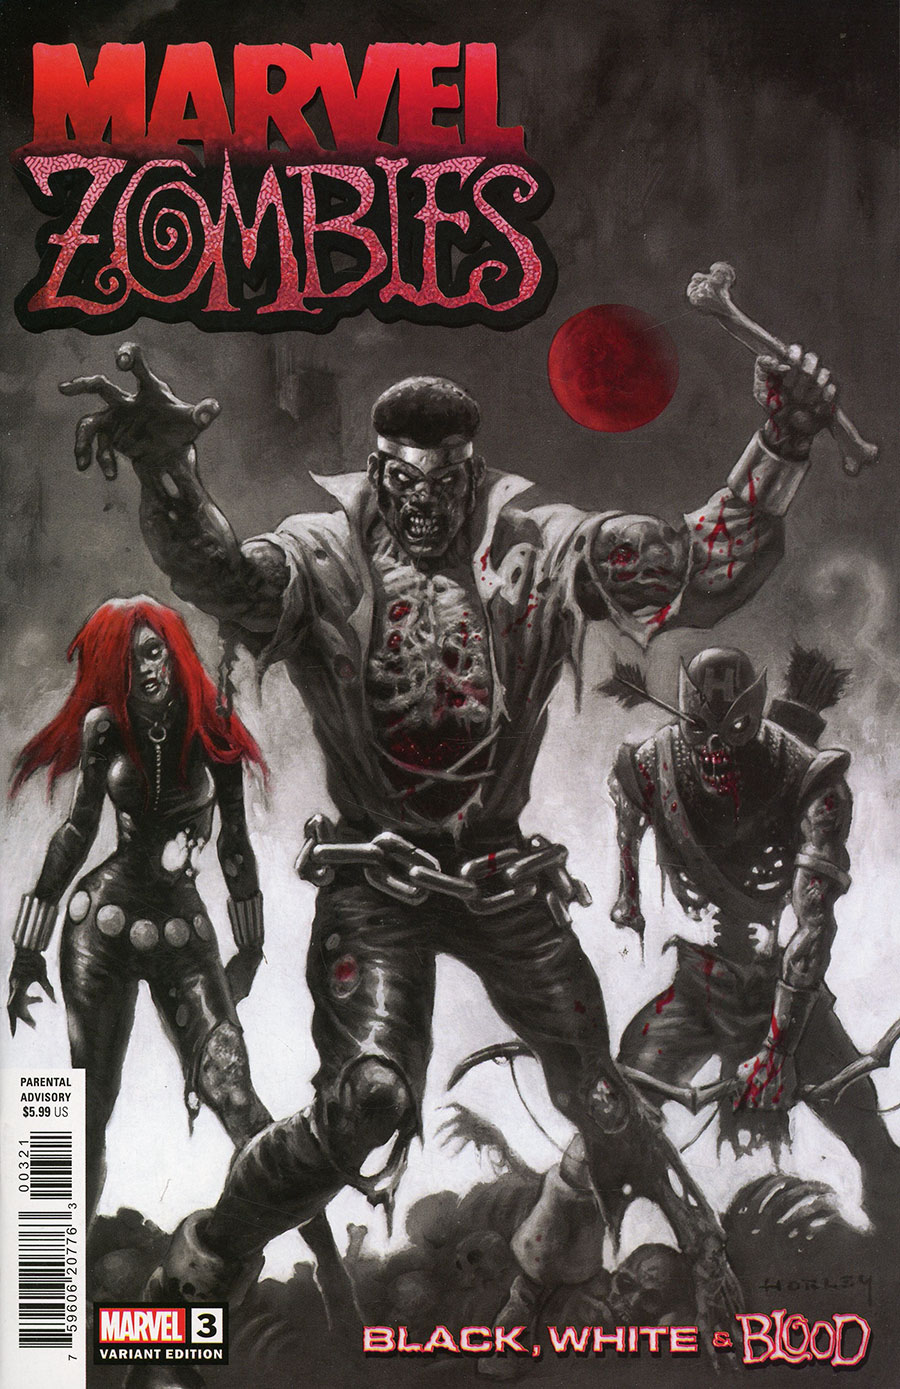 Marvel Zombies Black White & Blood #3 Cover B Variant Alex Horley Cover